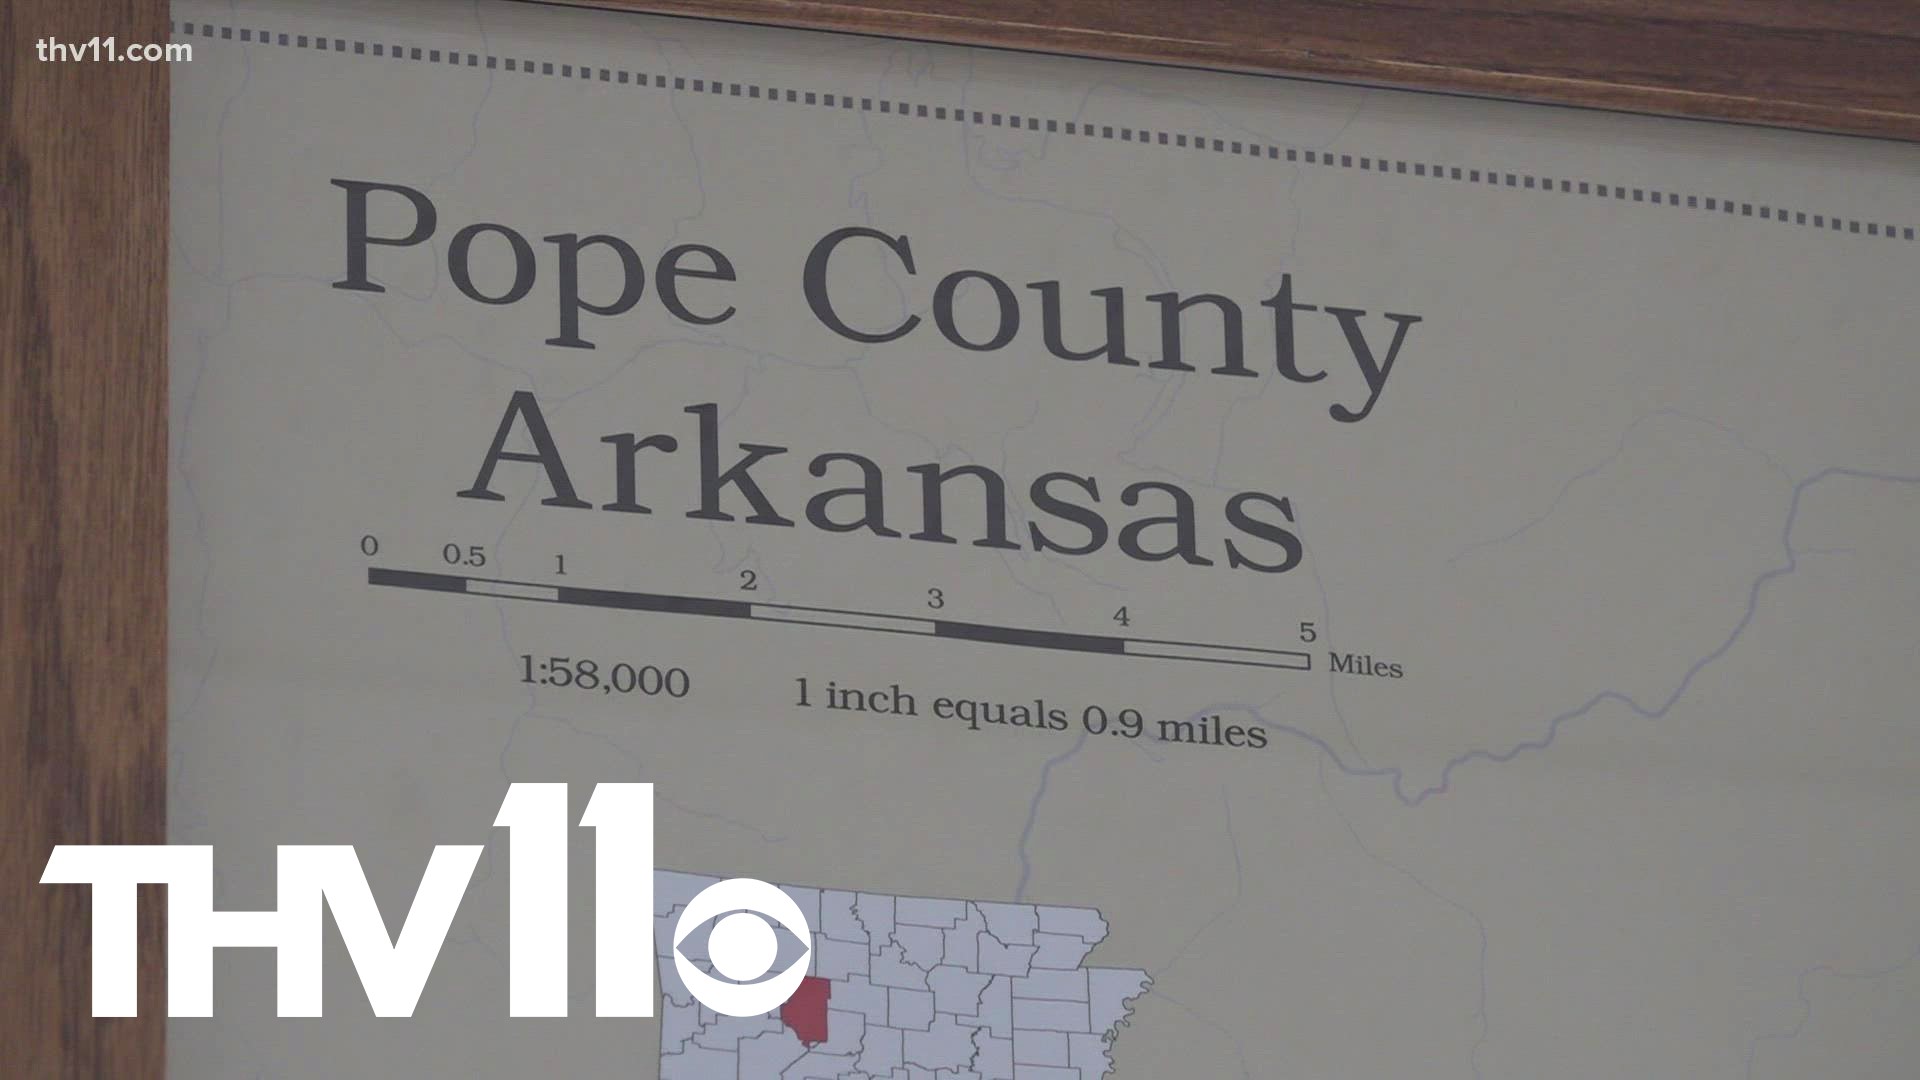 We now know who will be building a new casino in Pope County, but now we're waiting to find out when the construction could begin.